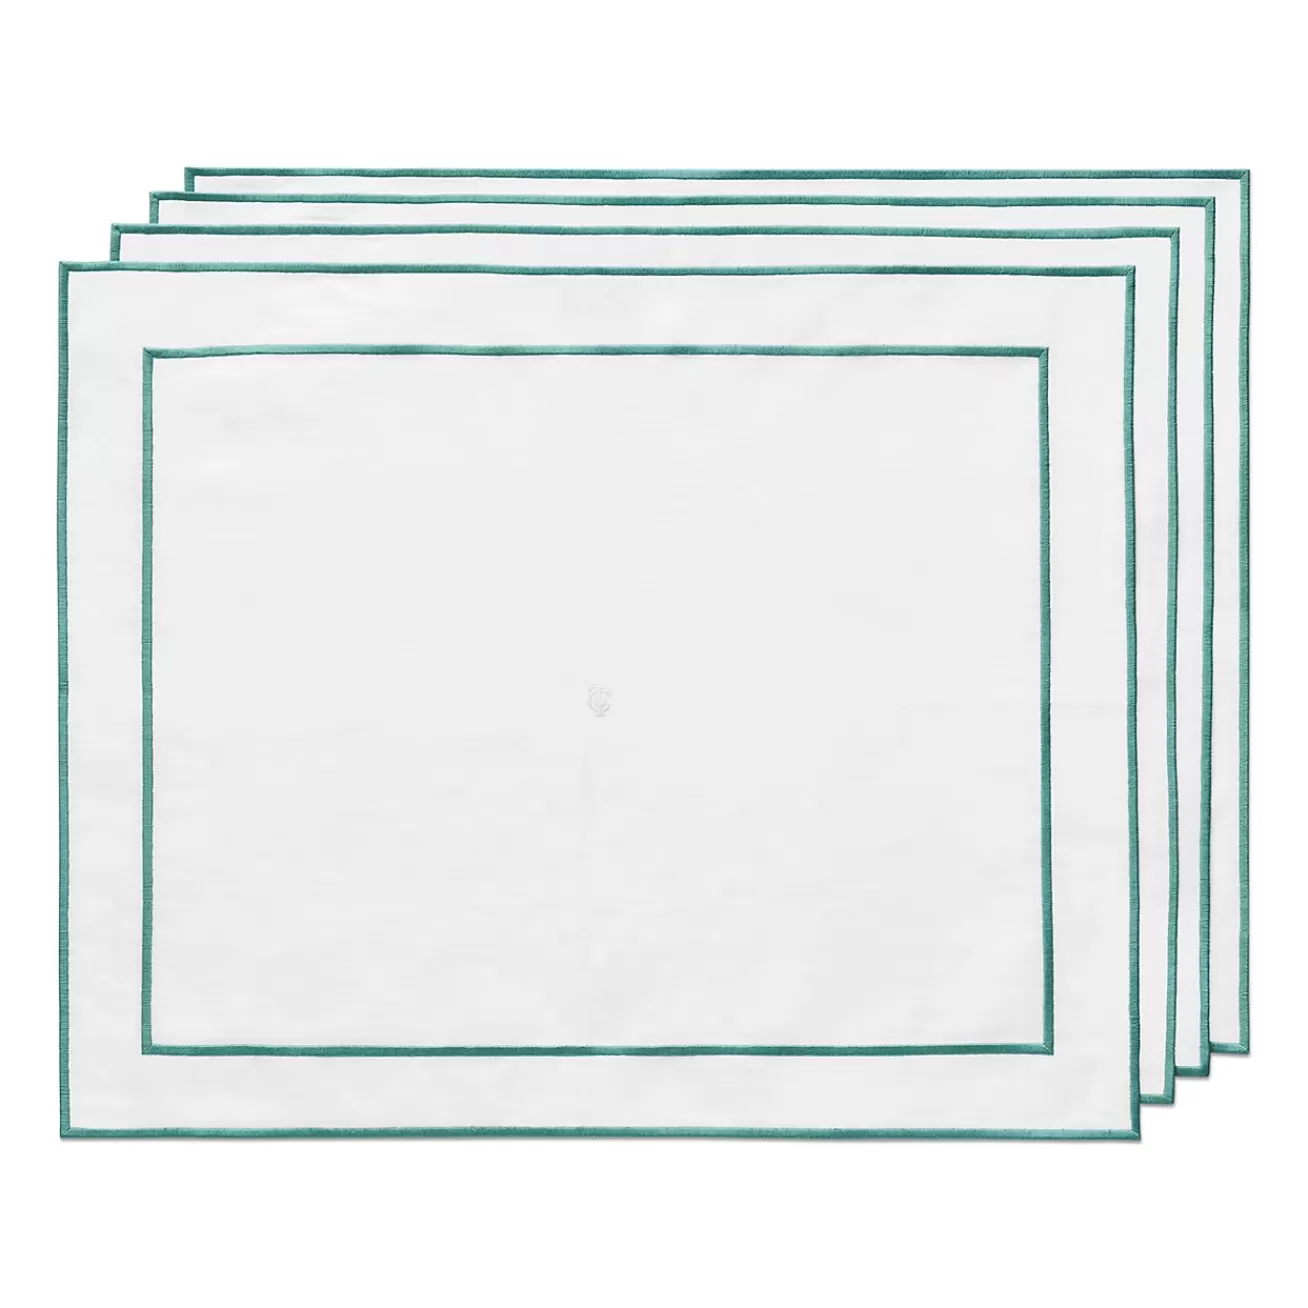 Tiffany & Co. Tiffany Home Essentials Embroidered Placemats in Linen, Set of Four | ^ Tiffany Blue® Gifts | Decor